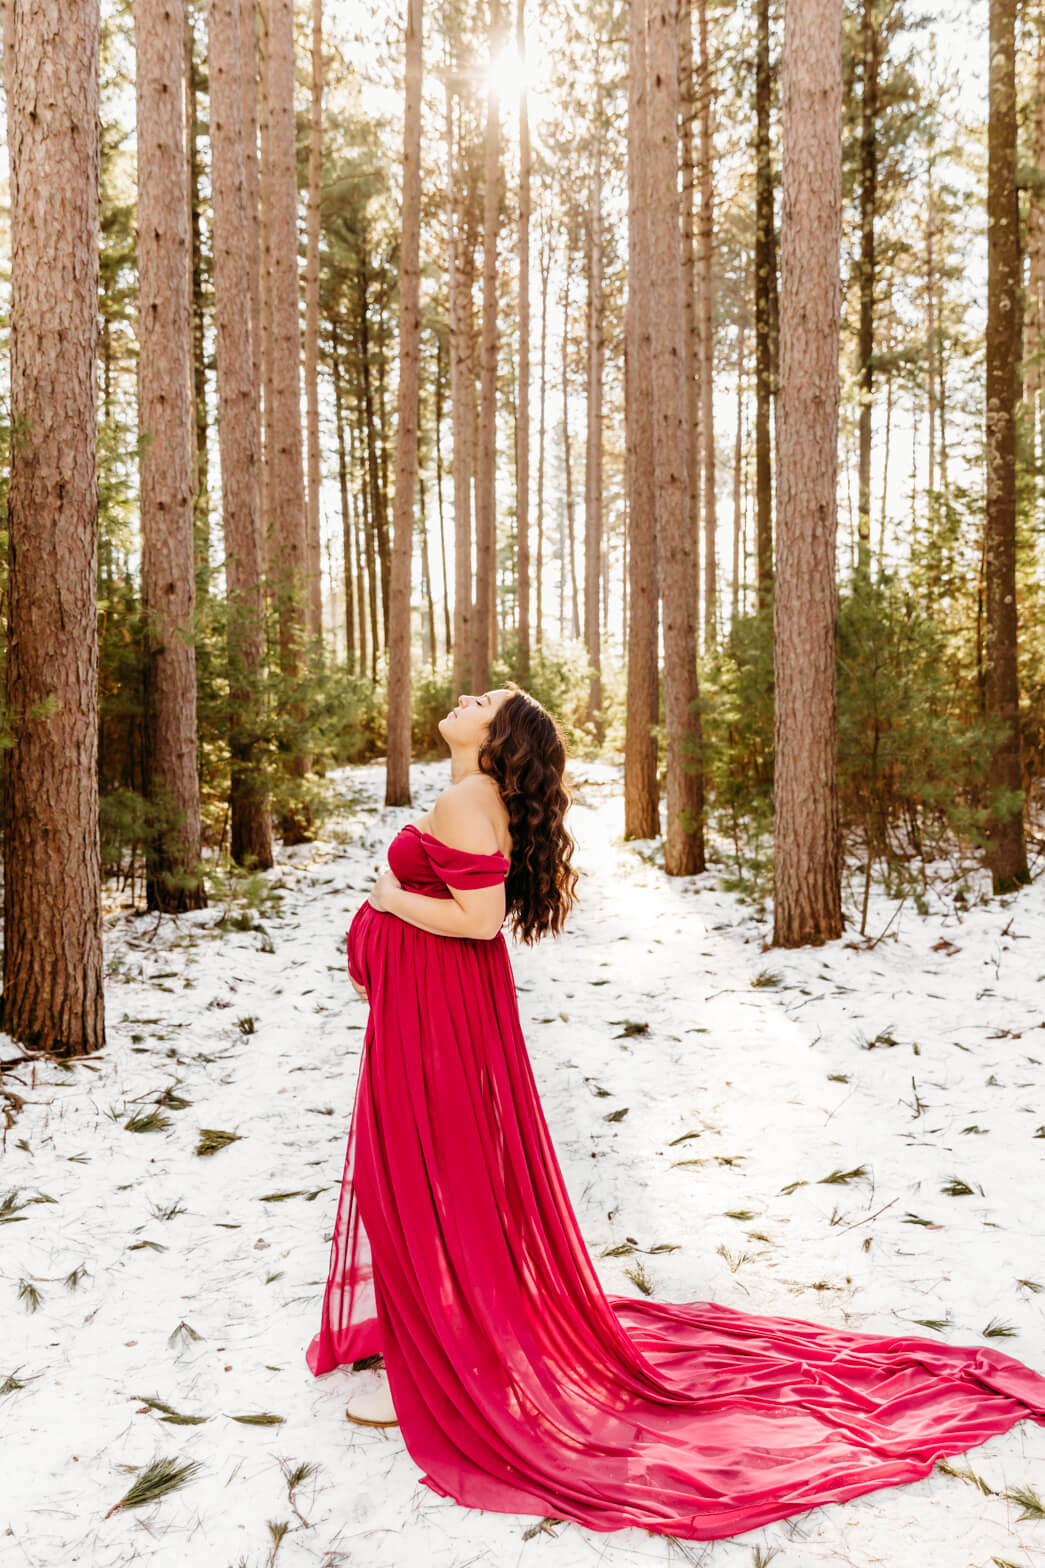 A pregnant woman stands in a snowy forest wearing a long red maternity gown jill coulter